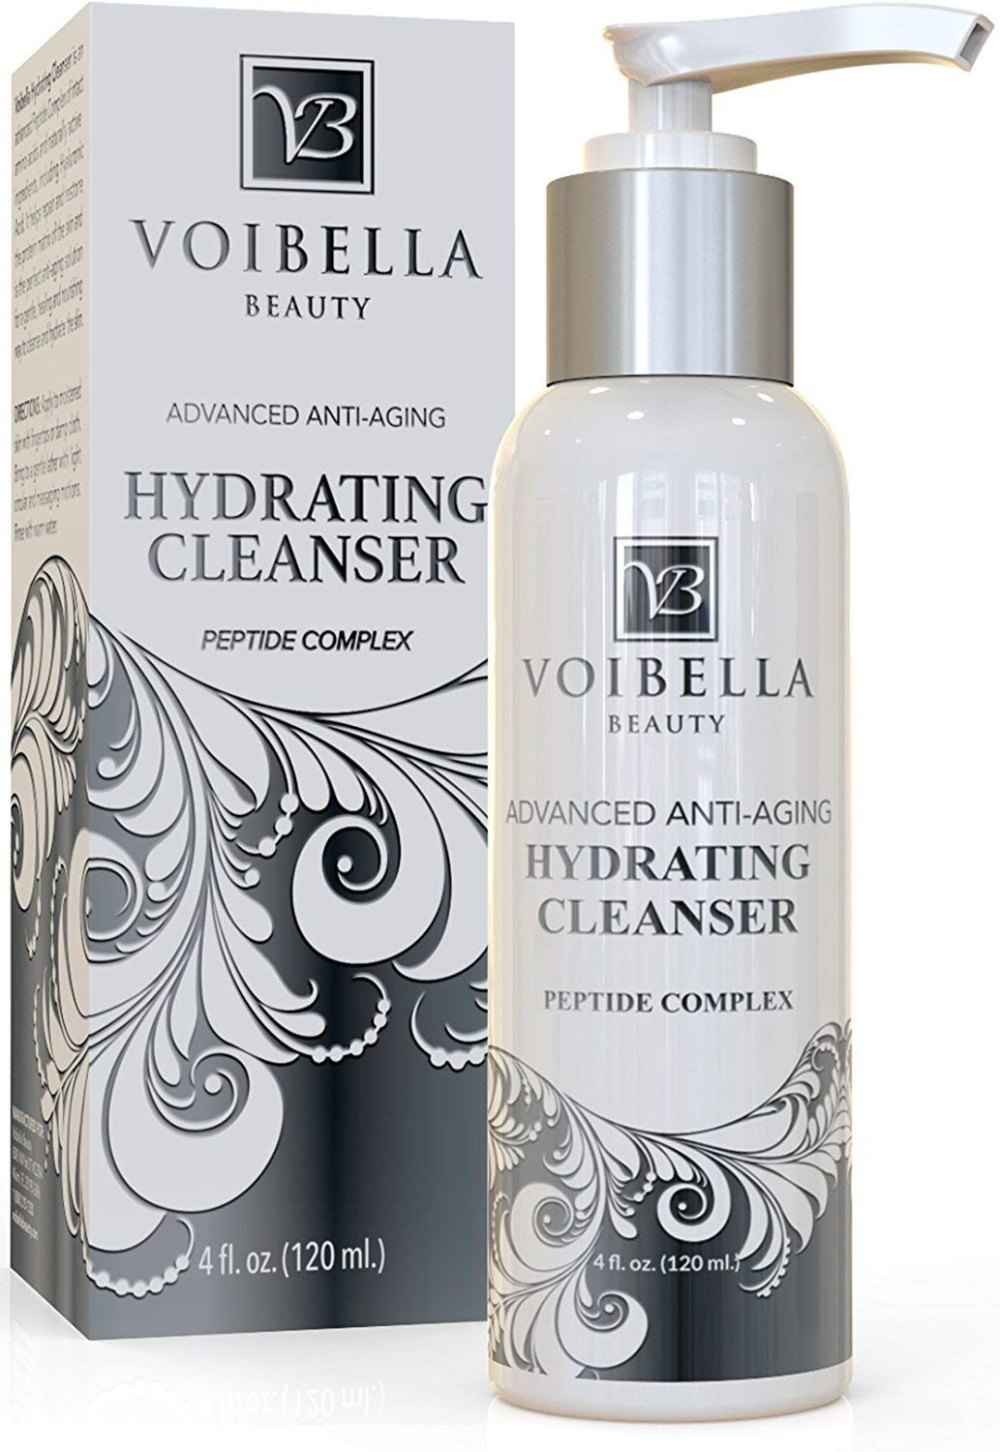 Voibella Beauty Advanced Anti-Aging Hydrating Cleanser